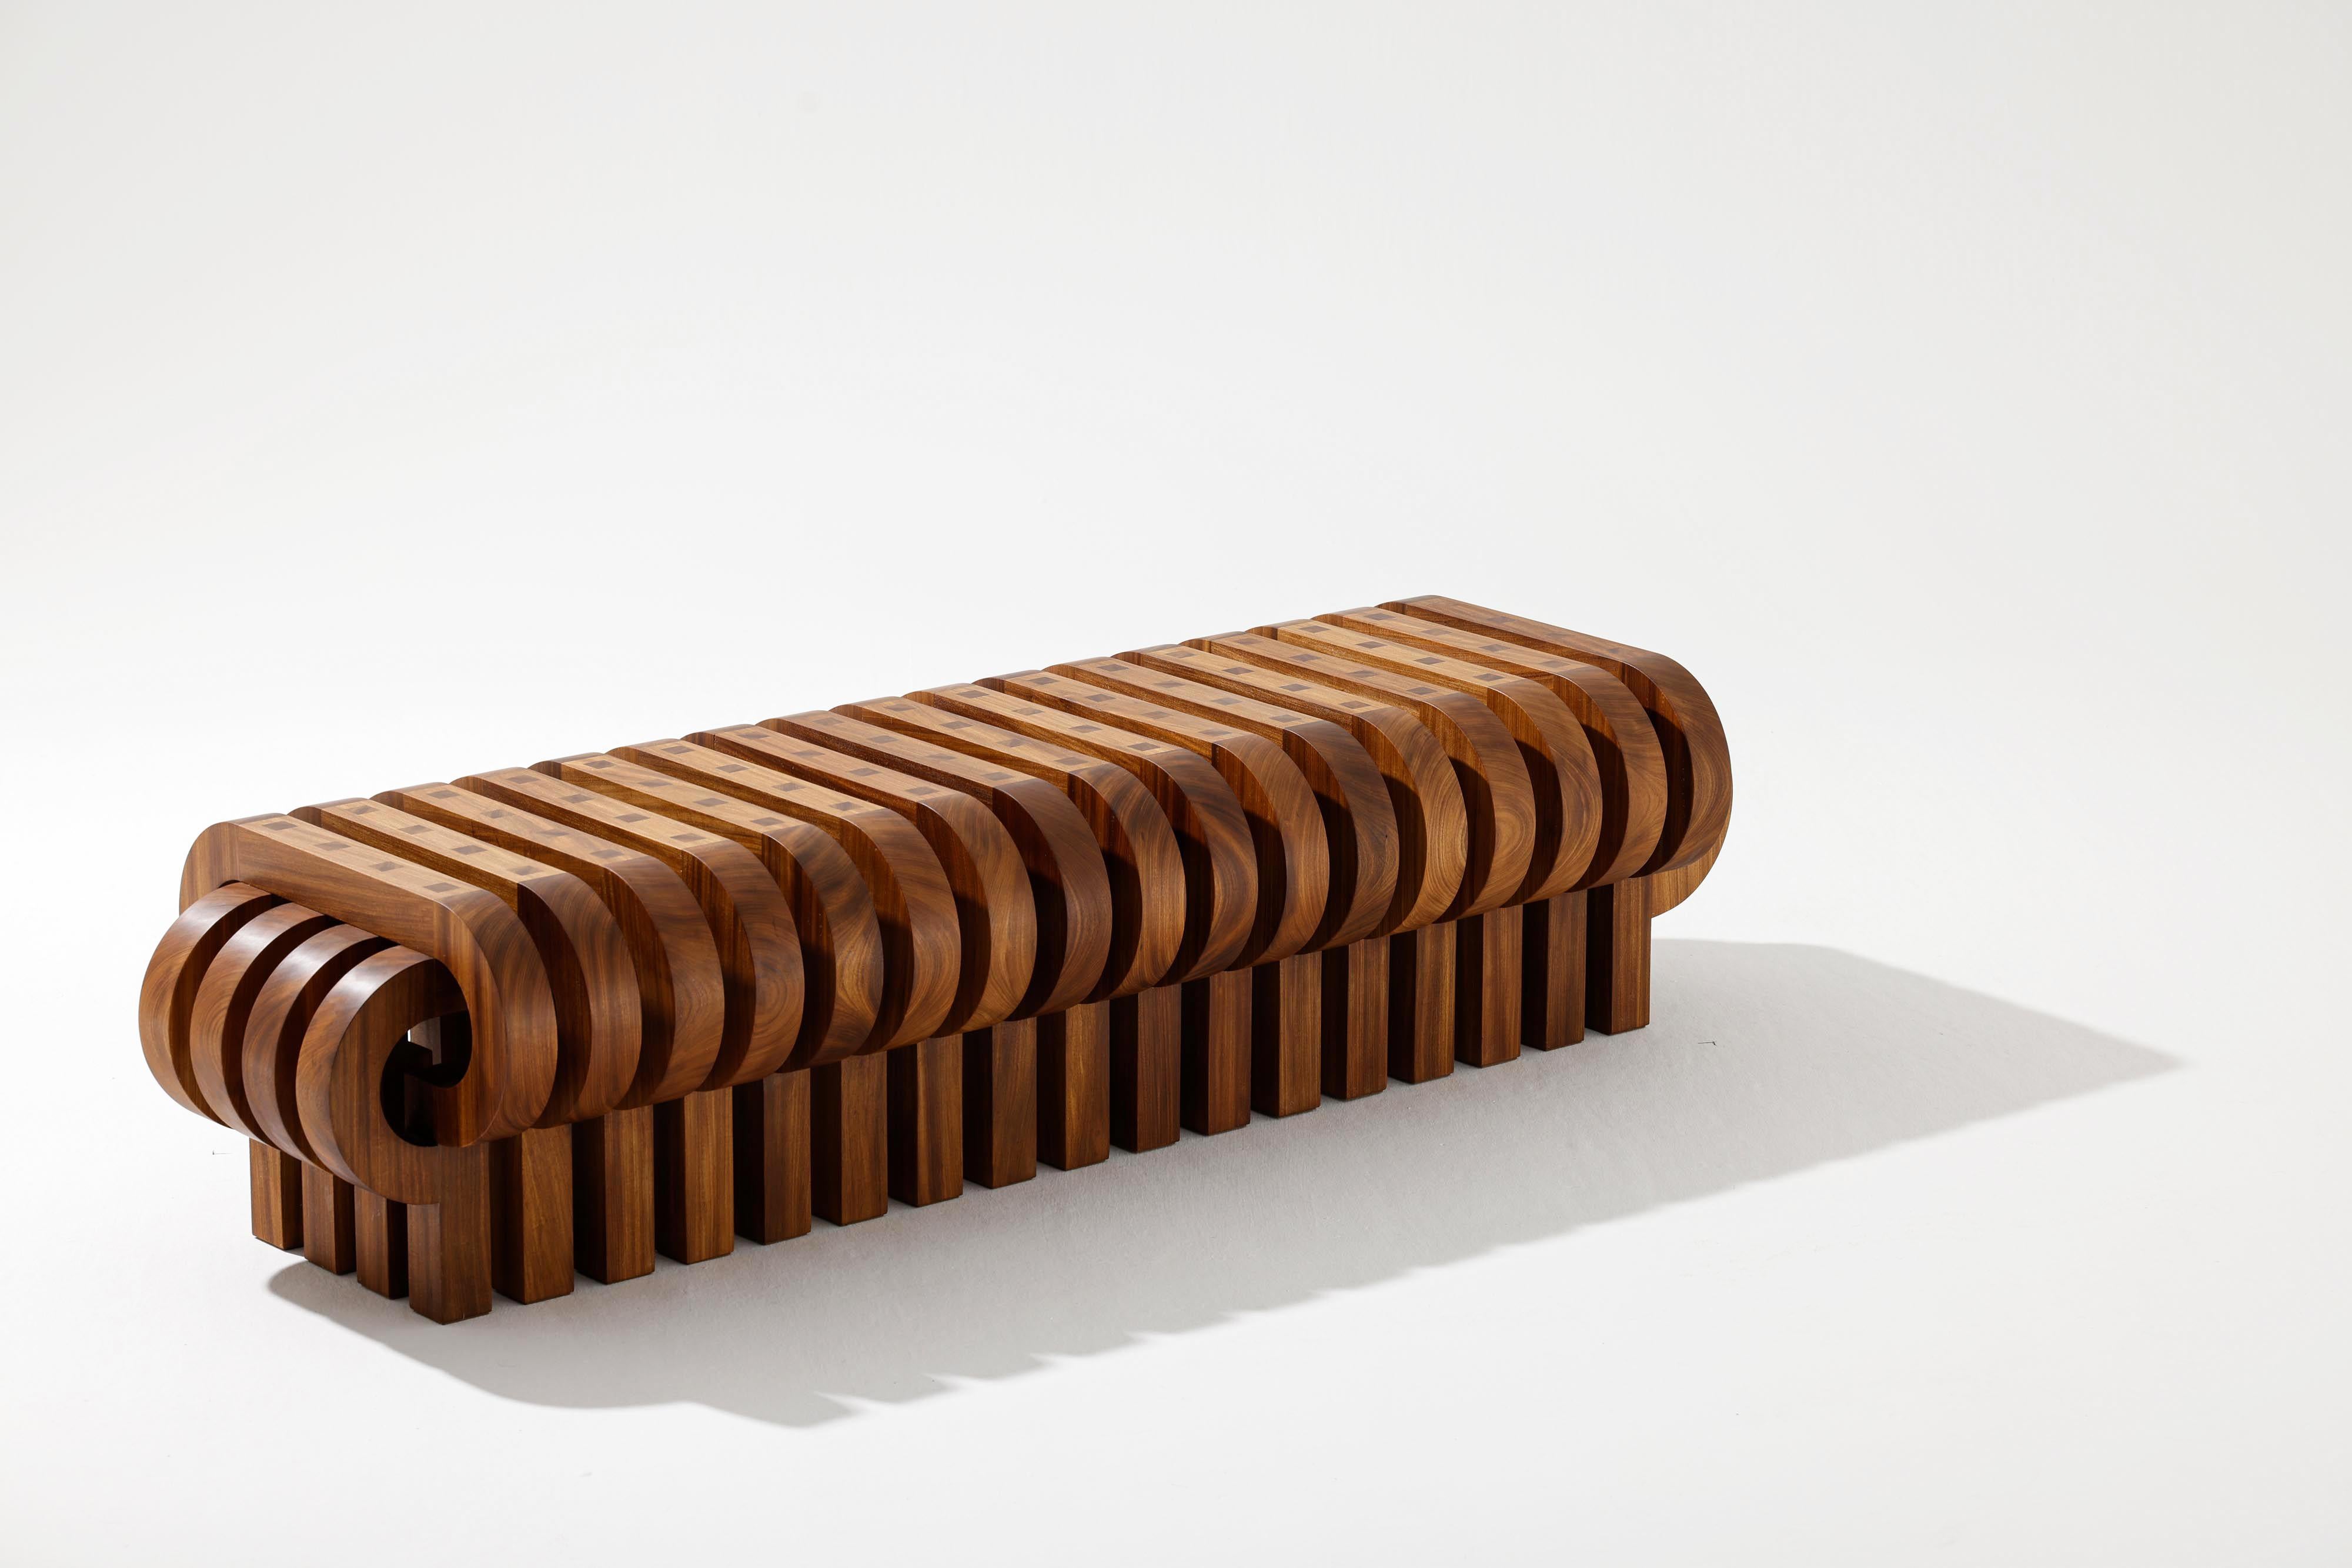 Tamga Afromasia Bench by Tolga Sencer
Dimensions: D 55.5 x W 172.5 x H 40 cm.
Materials: Afromosia wood.

Available in different wood options (massive american walnut, massive wenge, oak, afromosia or black lacquer with stainless steel details).